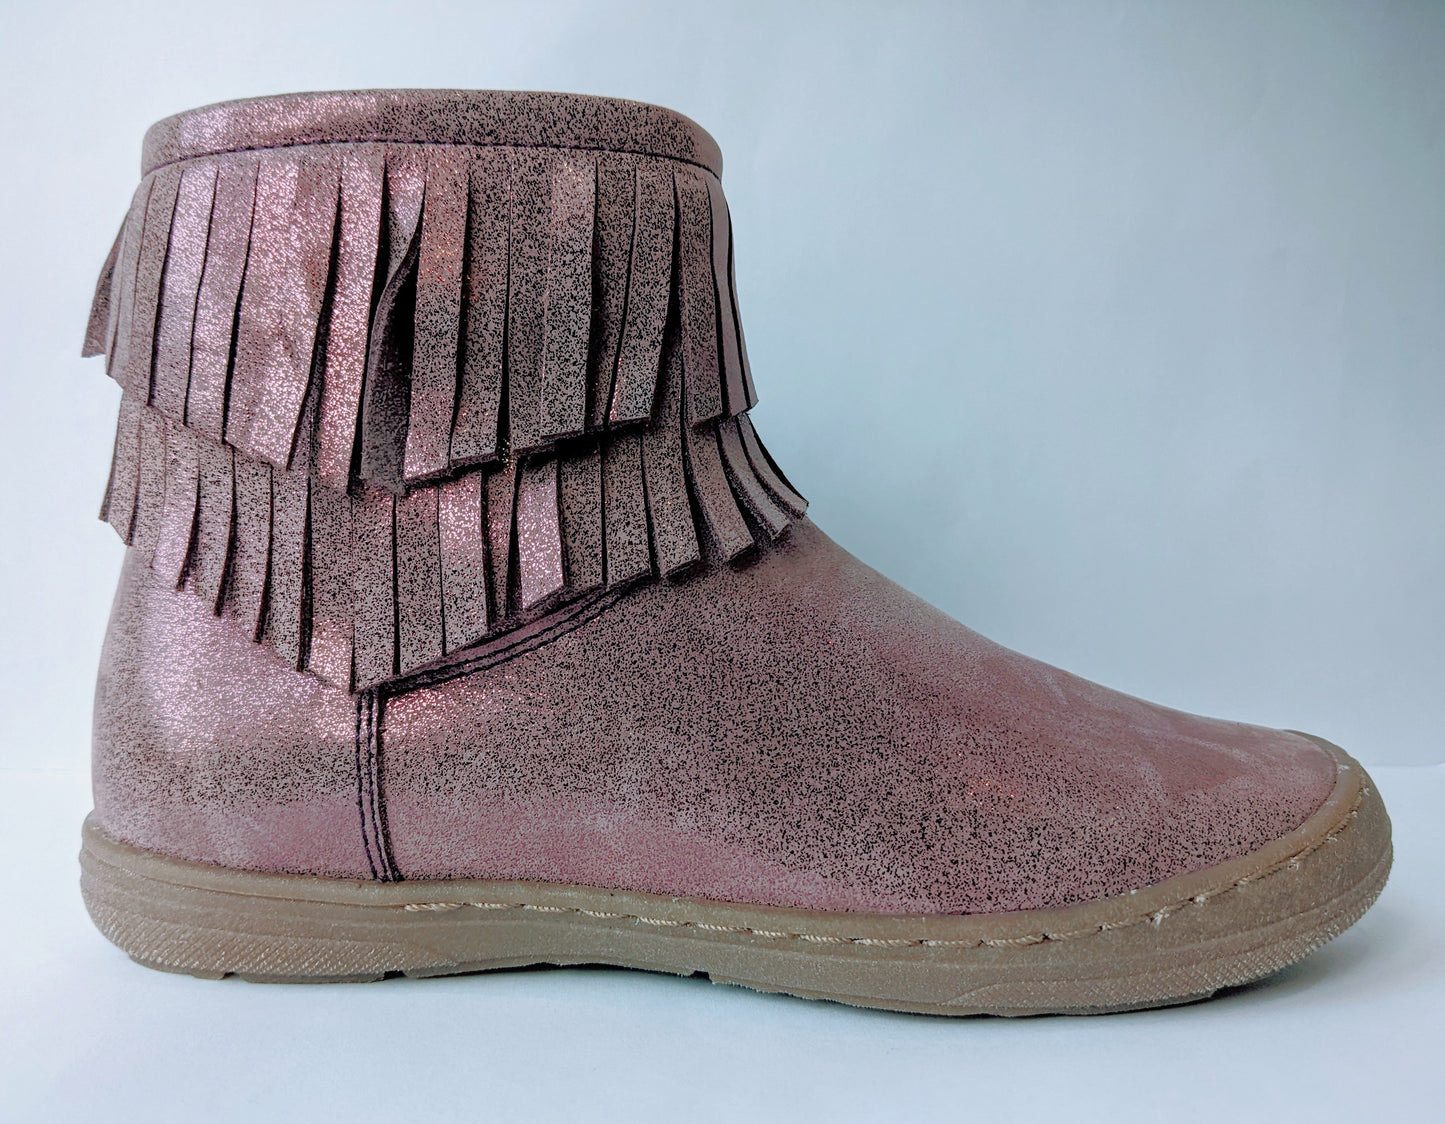 A girls ankle boot by Froddo, style G3160108-1,in pink shimmer with zip fastening. Right side view.